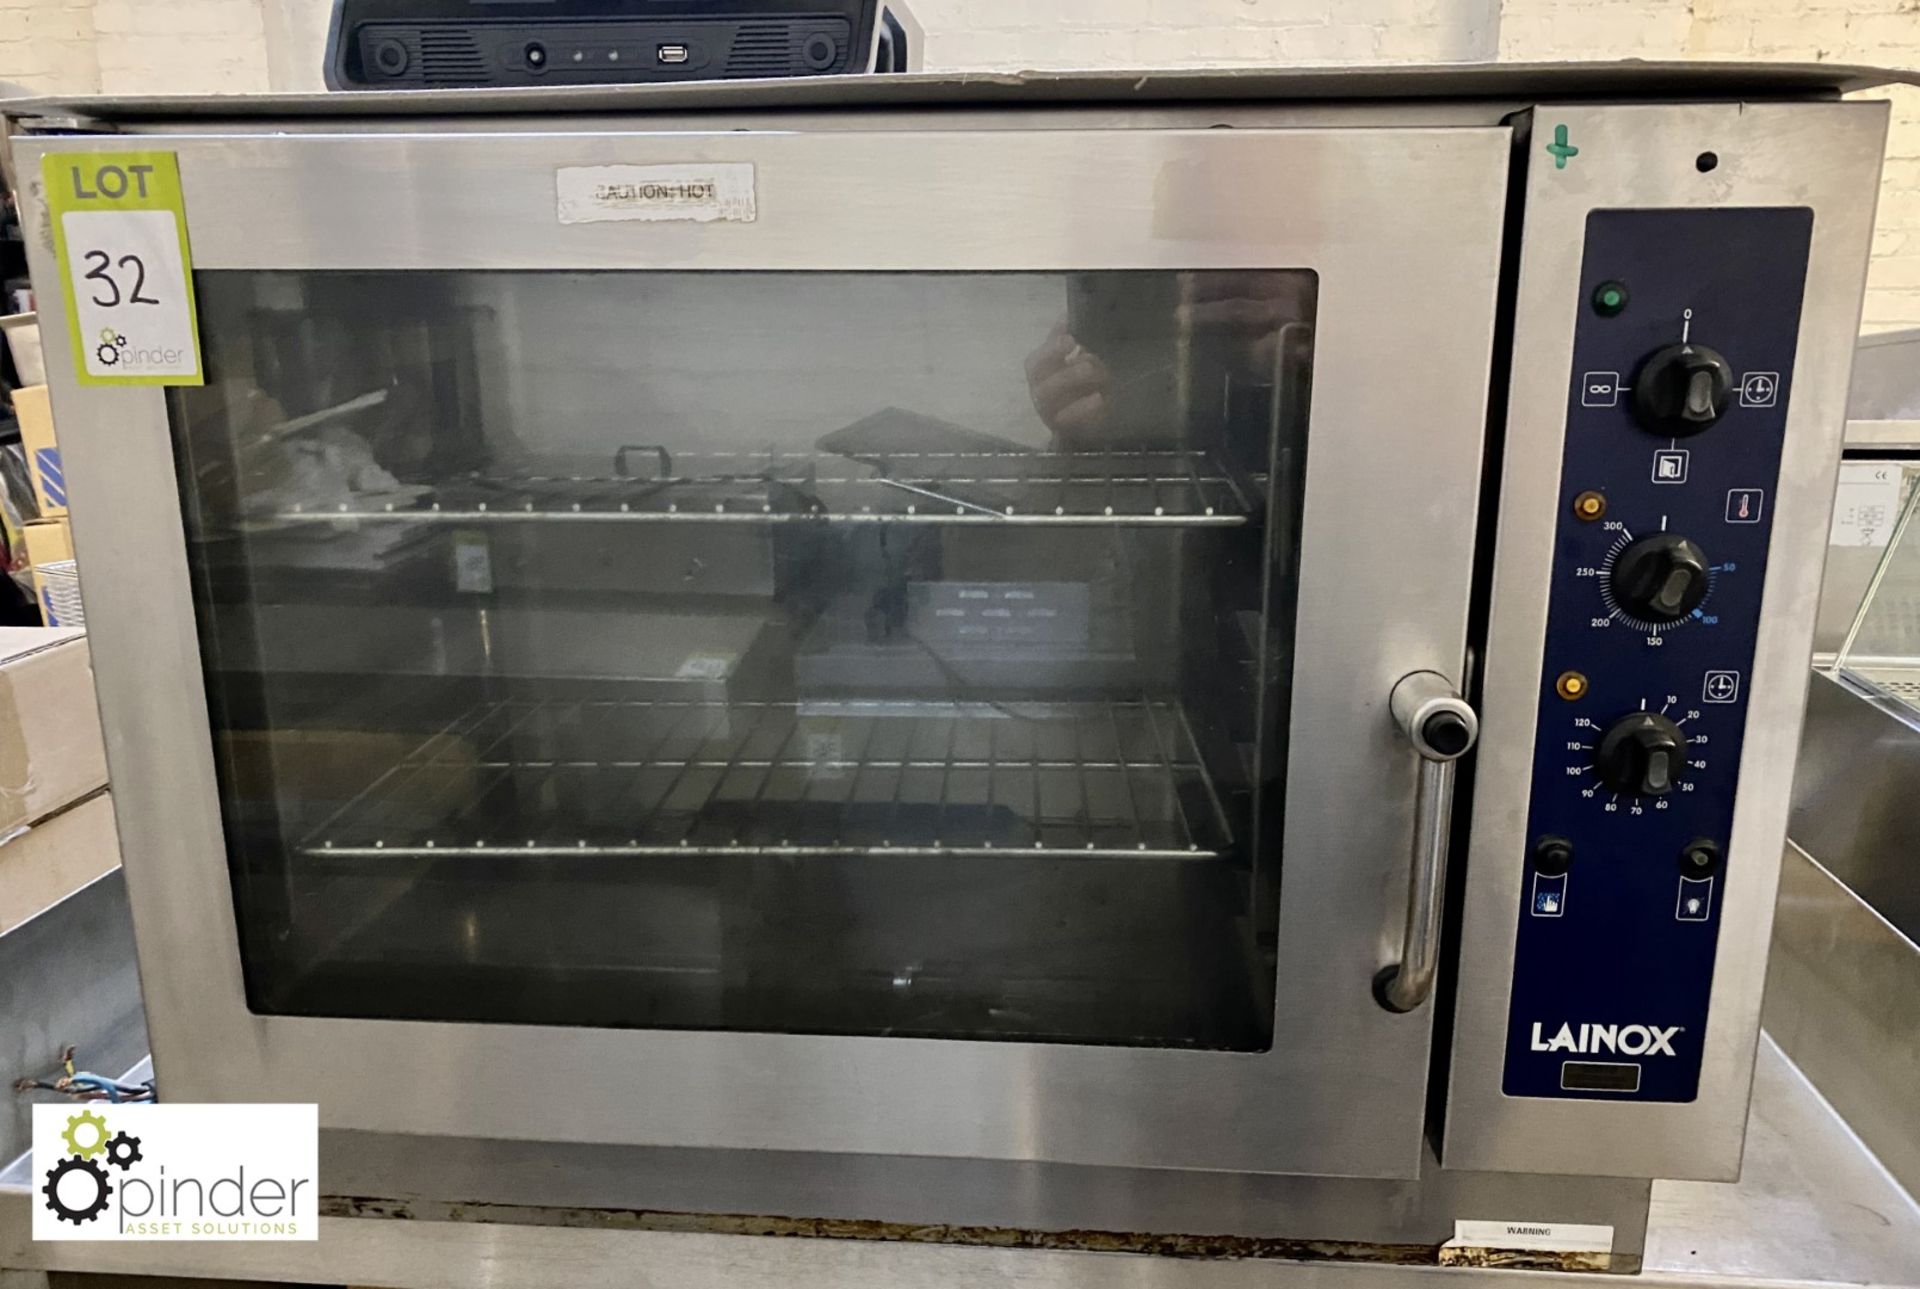 Lainox CE051M stainless steel Oven, 400volts, 850mm